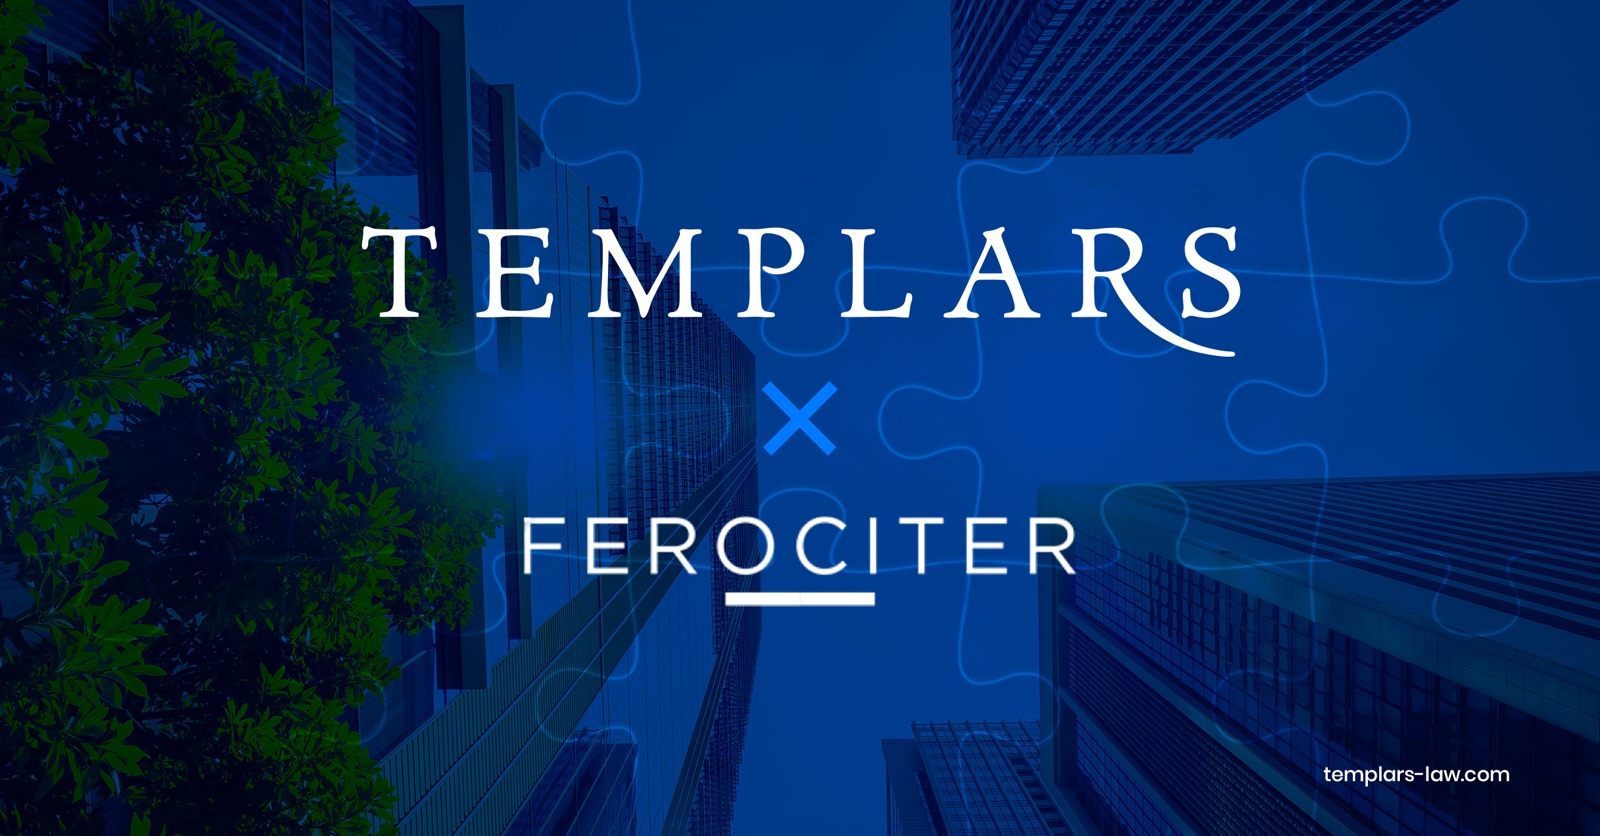 TEMPLARS merges with Ghanaian law firm FEROCITER to bolster its market position and offering in West Africa